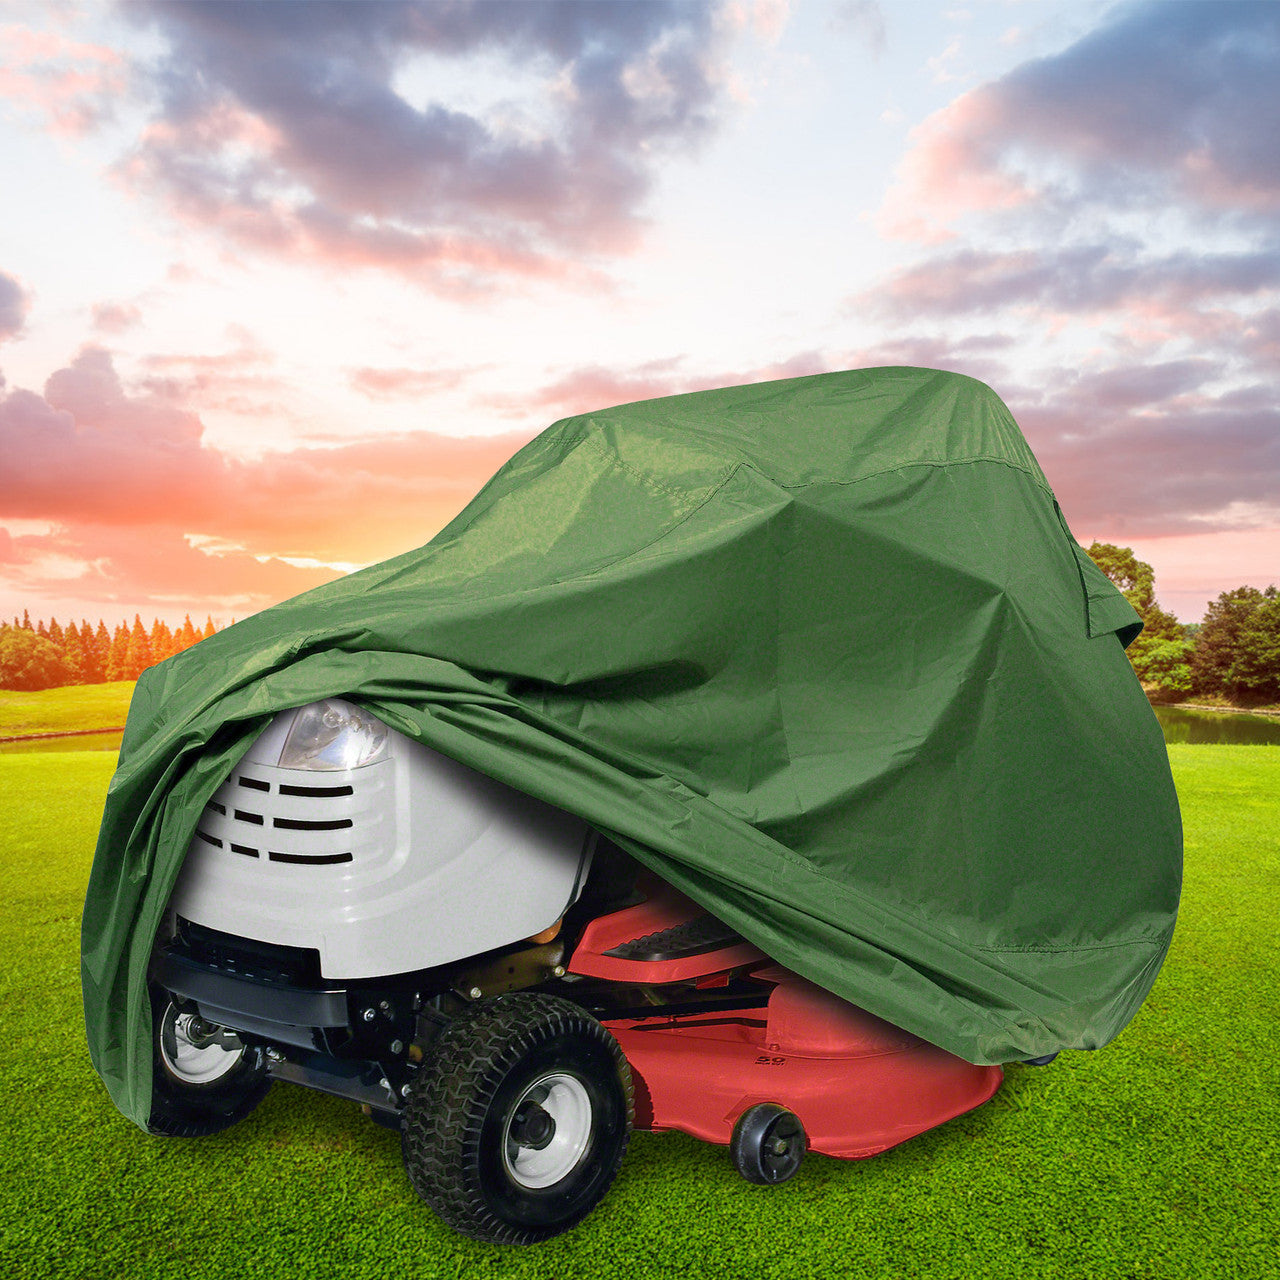 Heavy Duty Waterproof Tractor Lawn Mower Protective Cover Riding Garden Outdoor